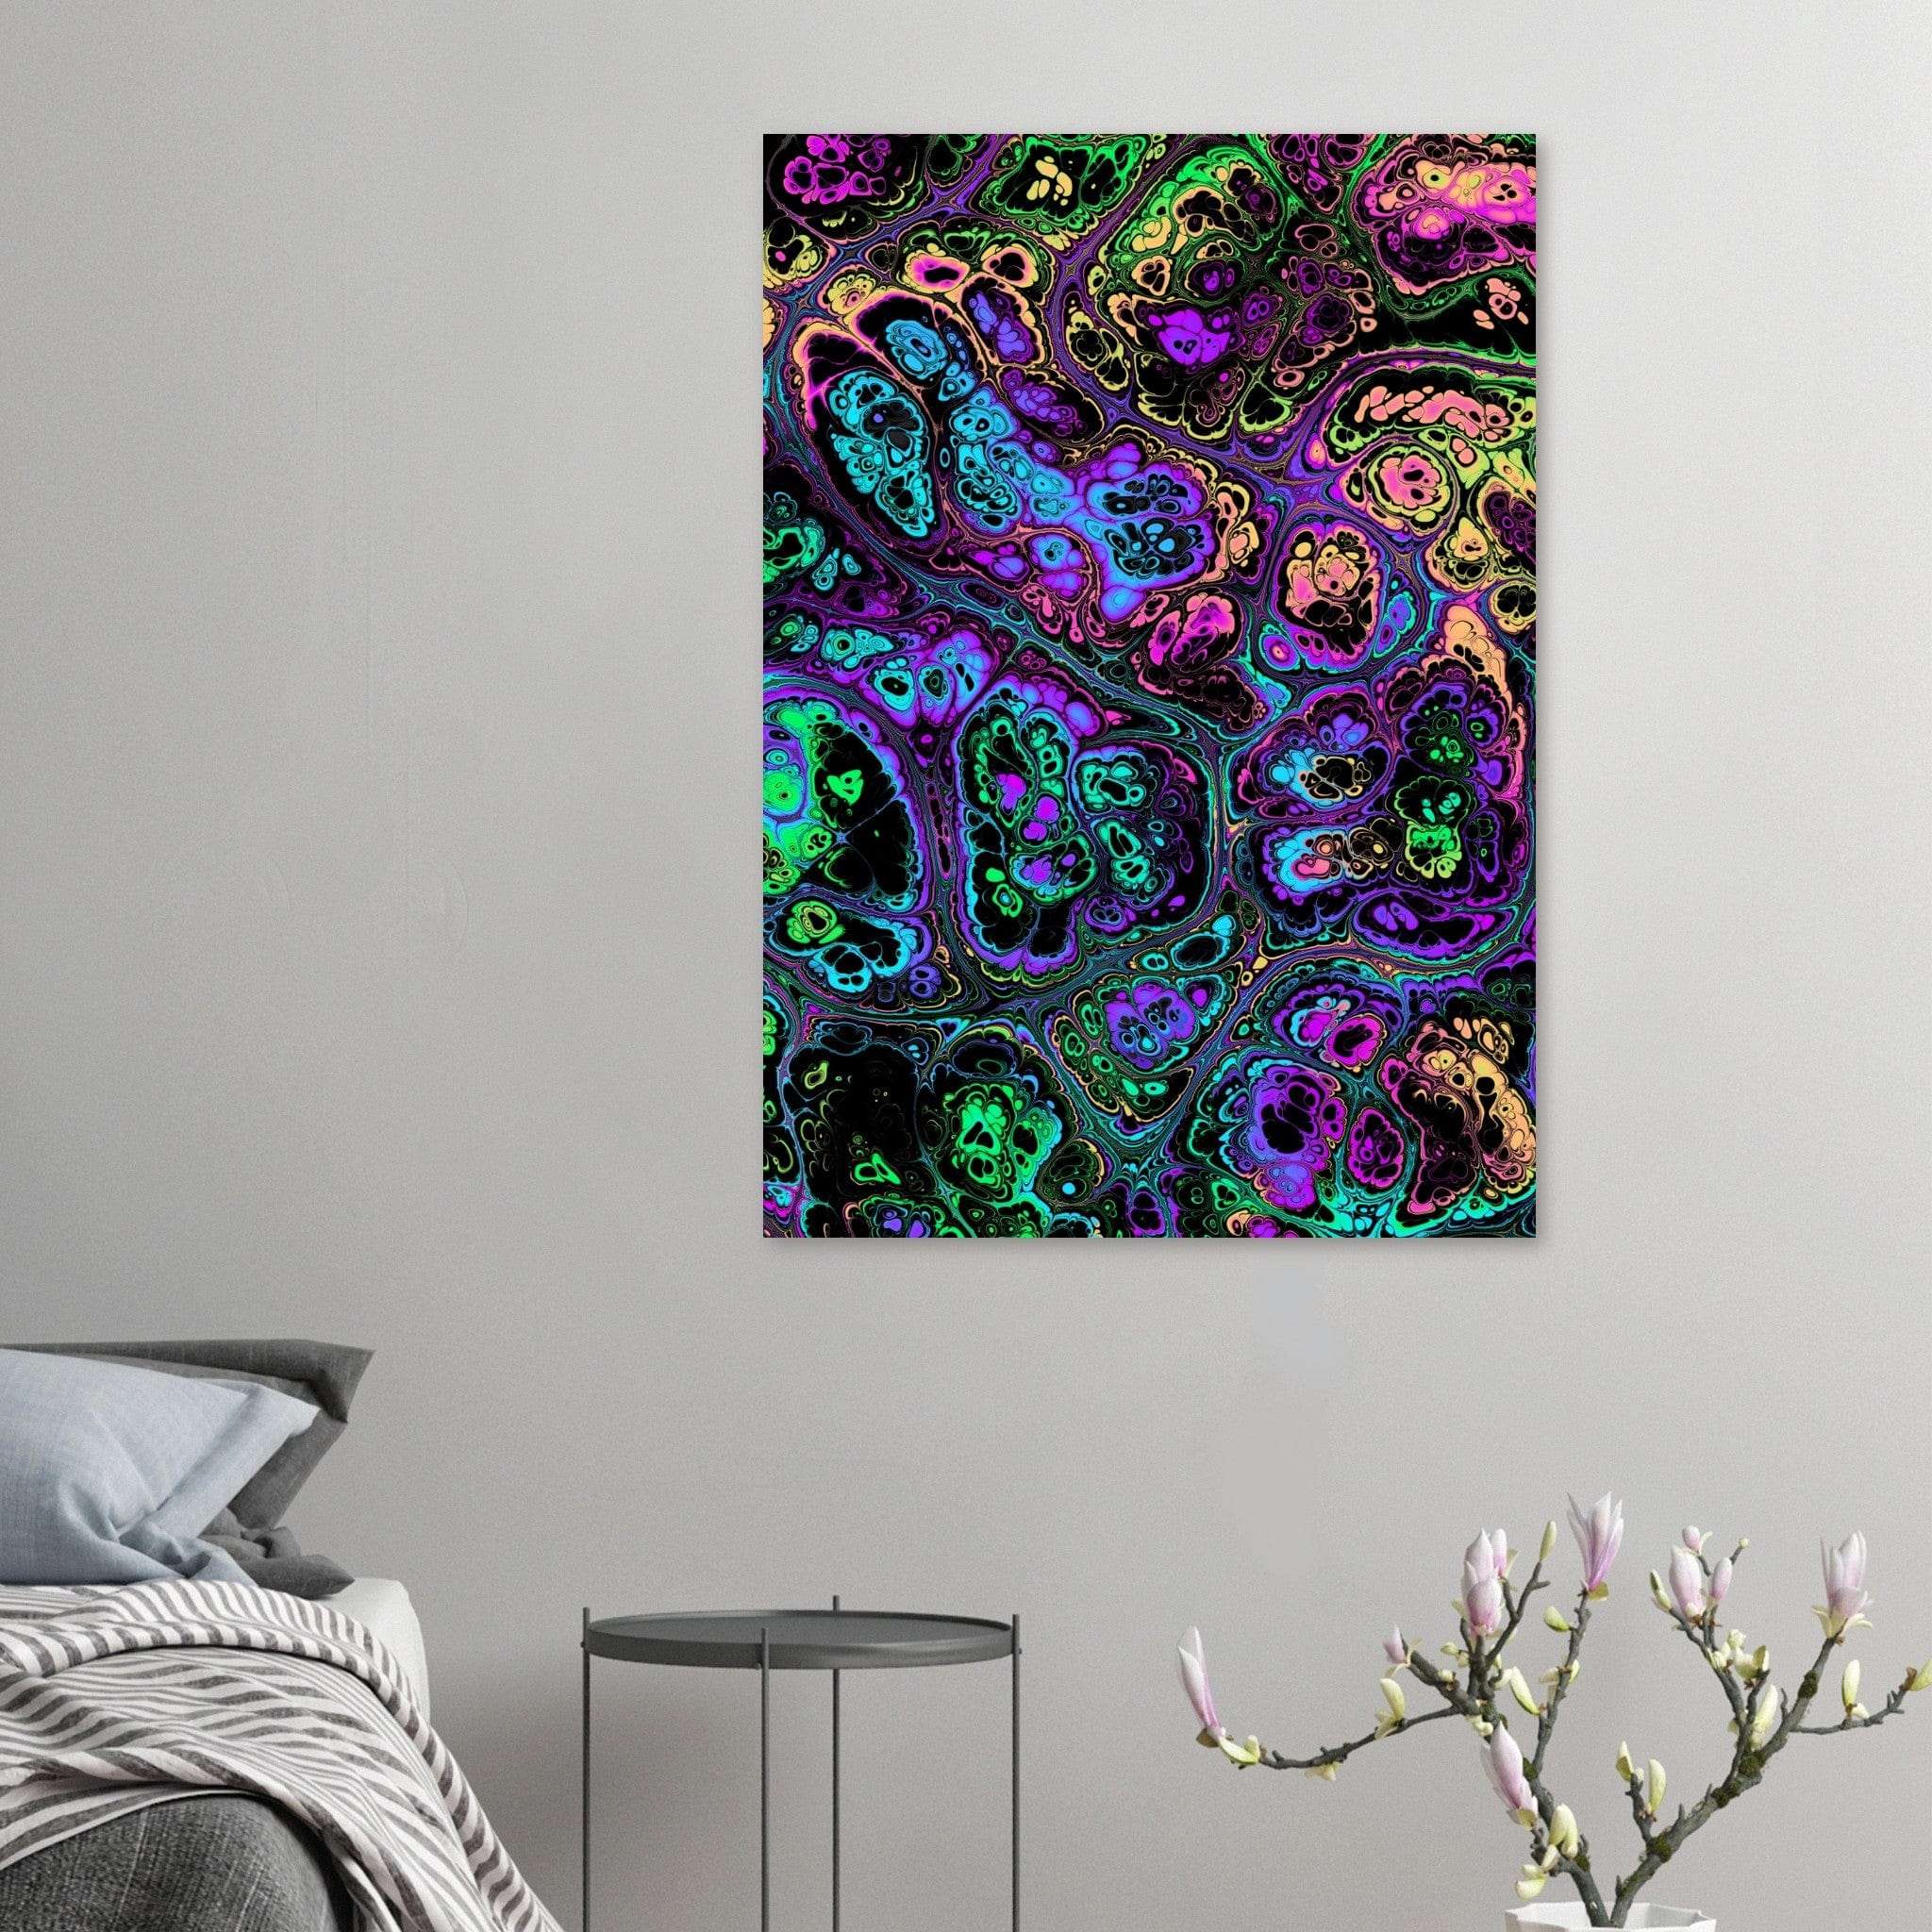 Little Squiffy Print Material 70x100 cm / 28x40″ / Vertical Neon Psychedelic Marble Aluminum Print Wall Art